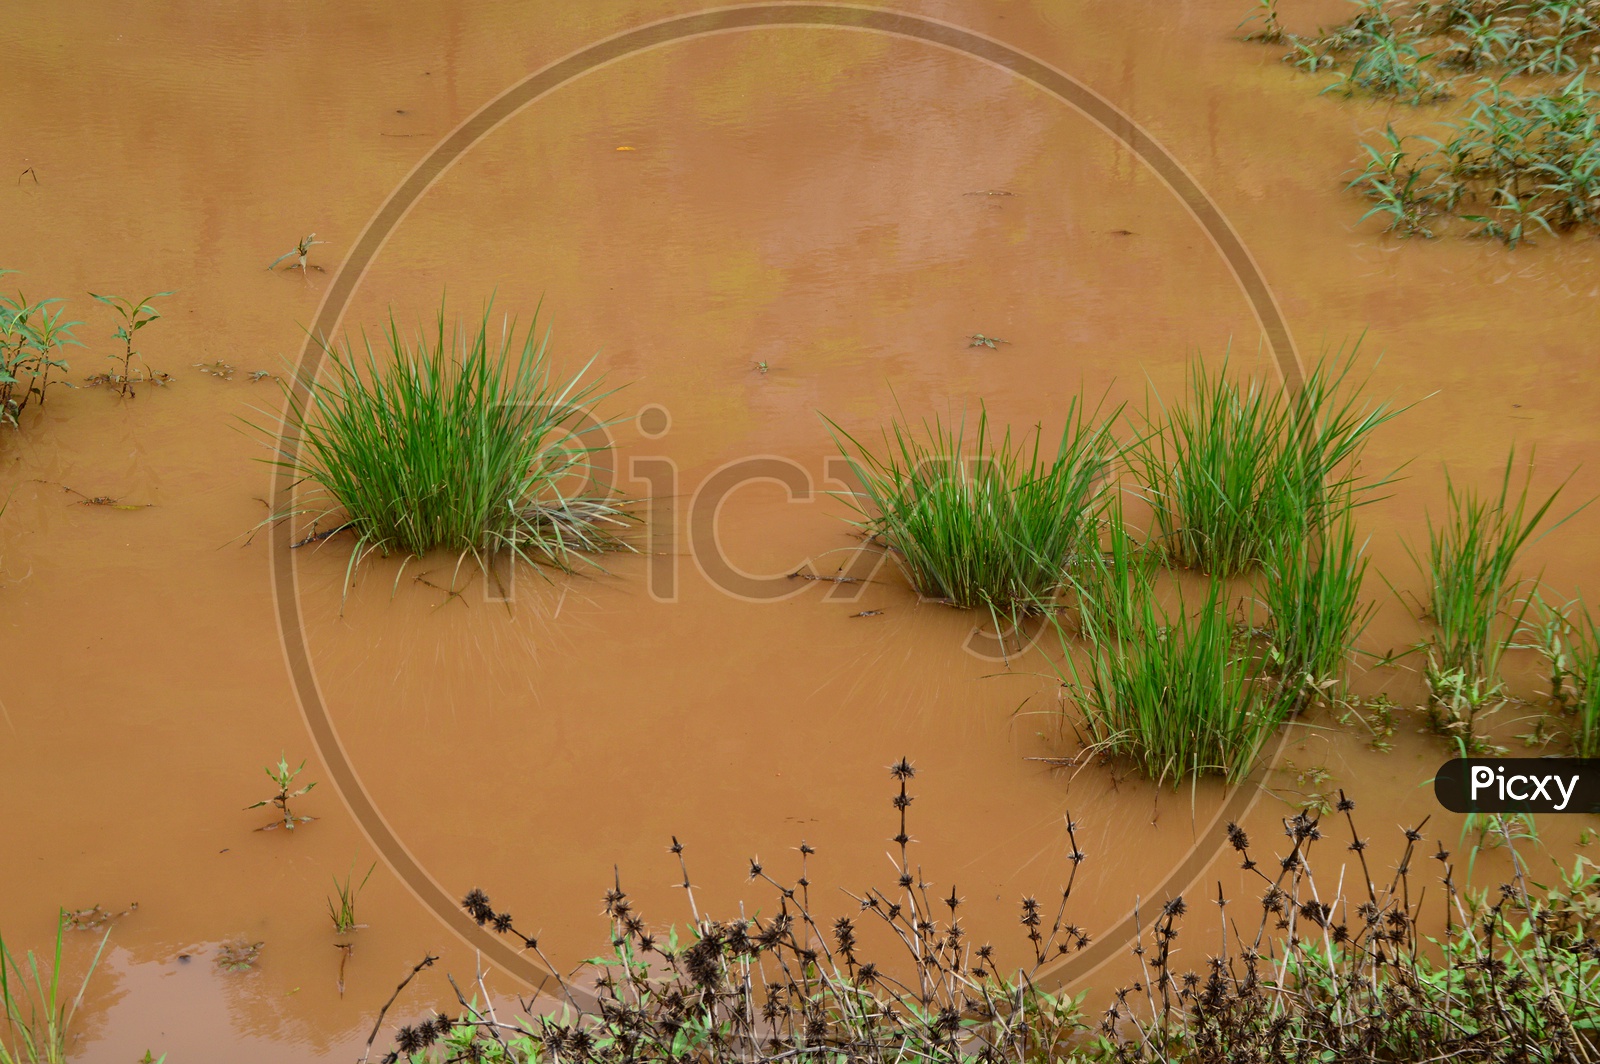 Stagnant flood water with grass